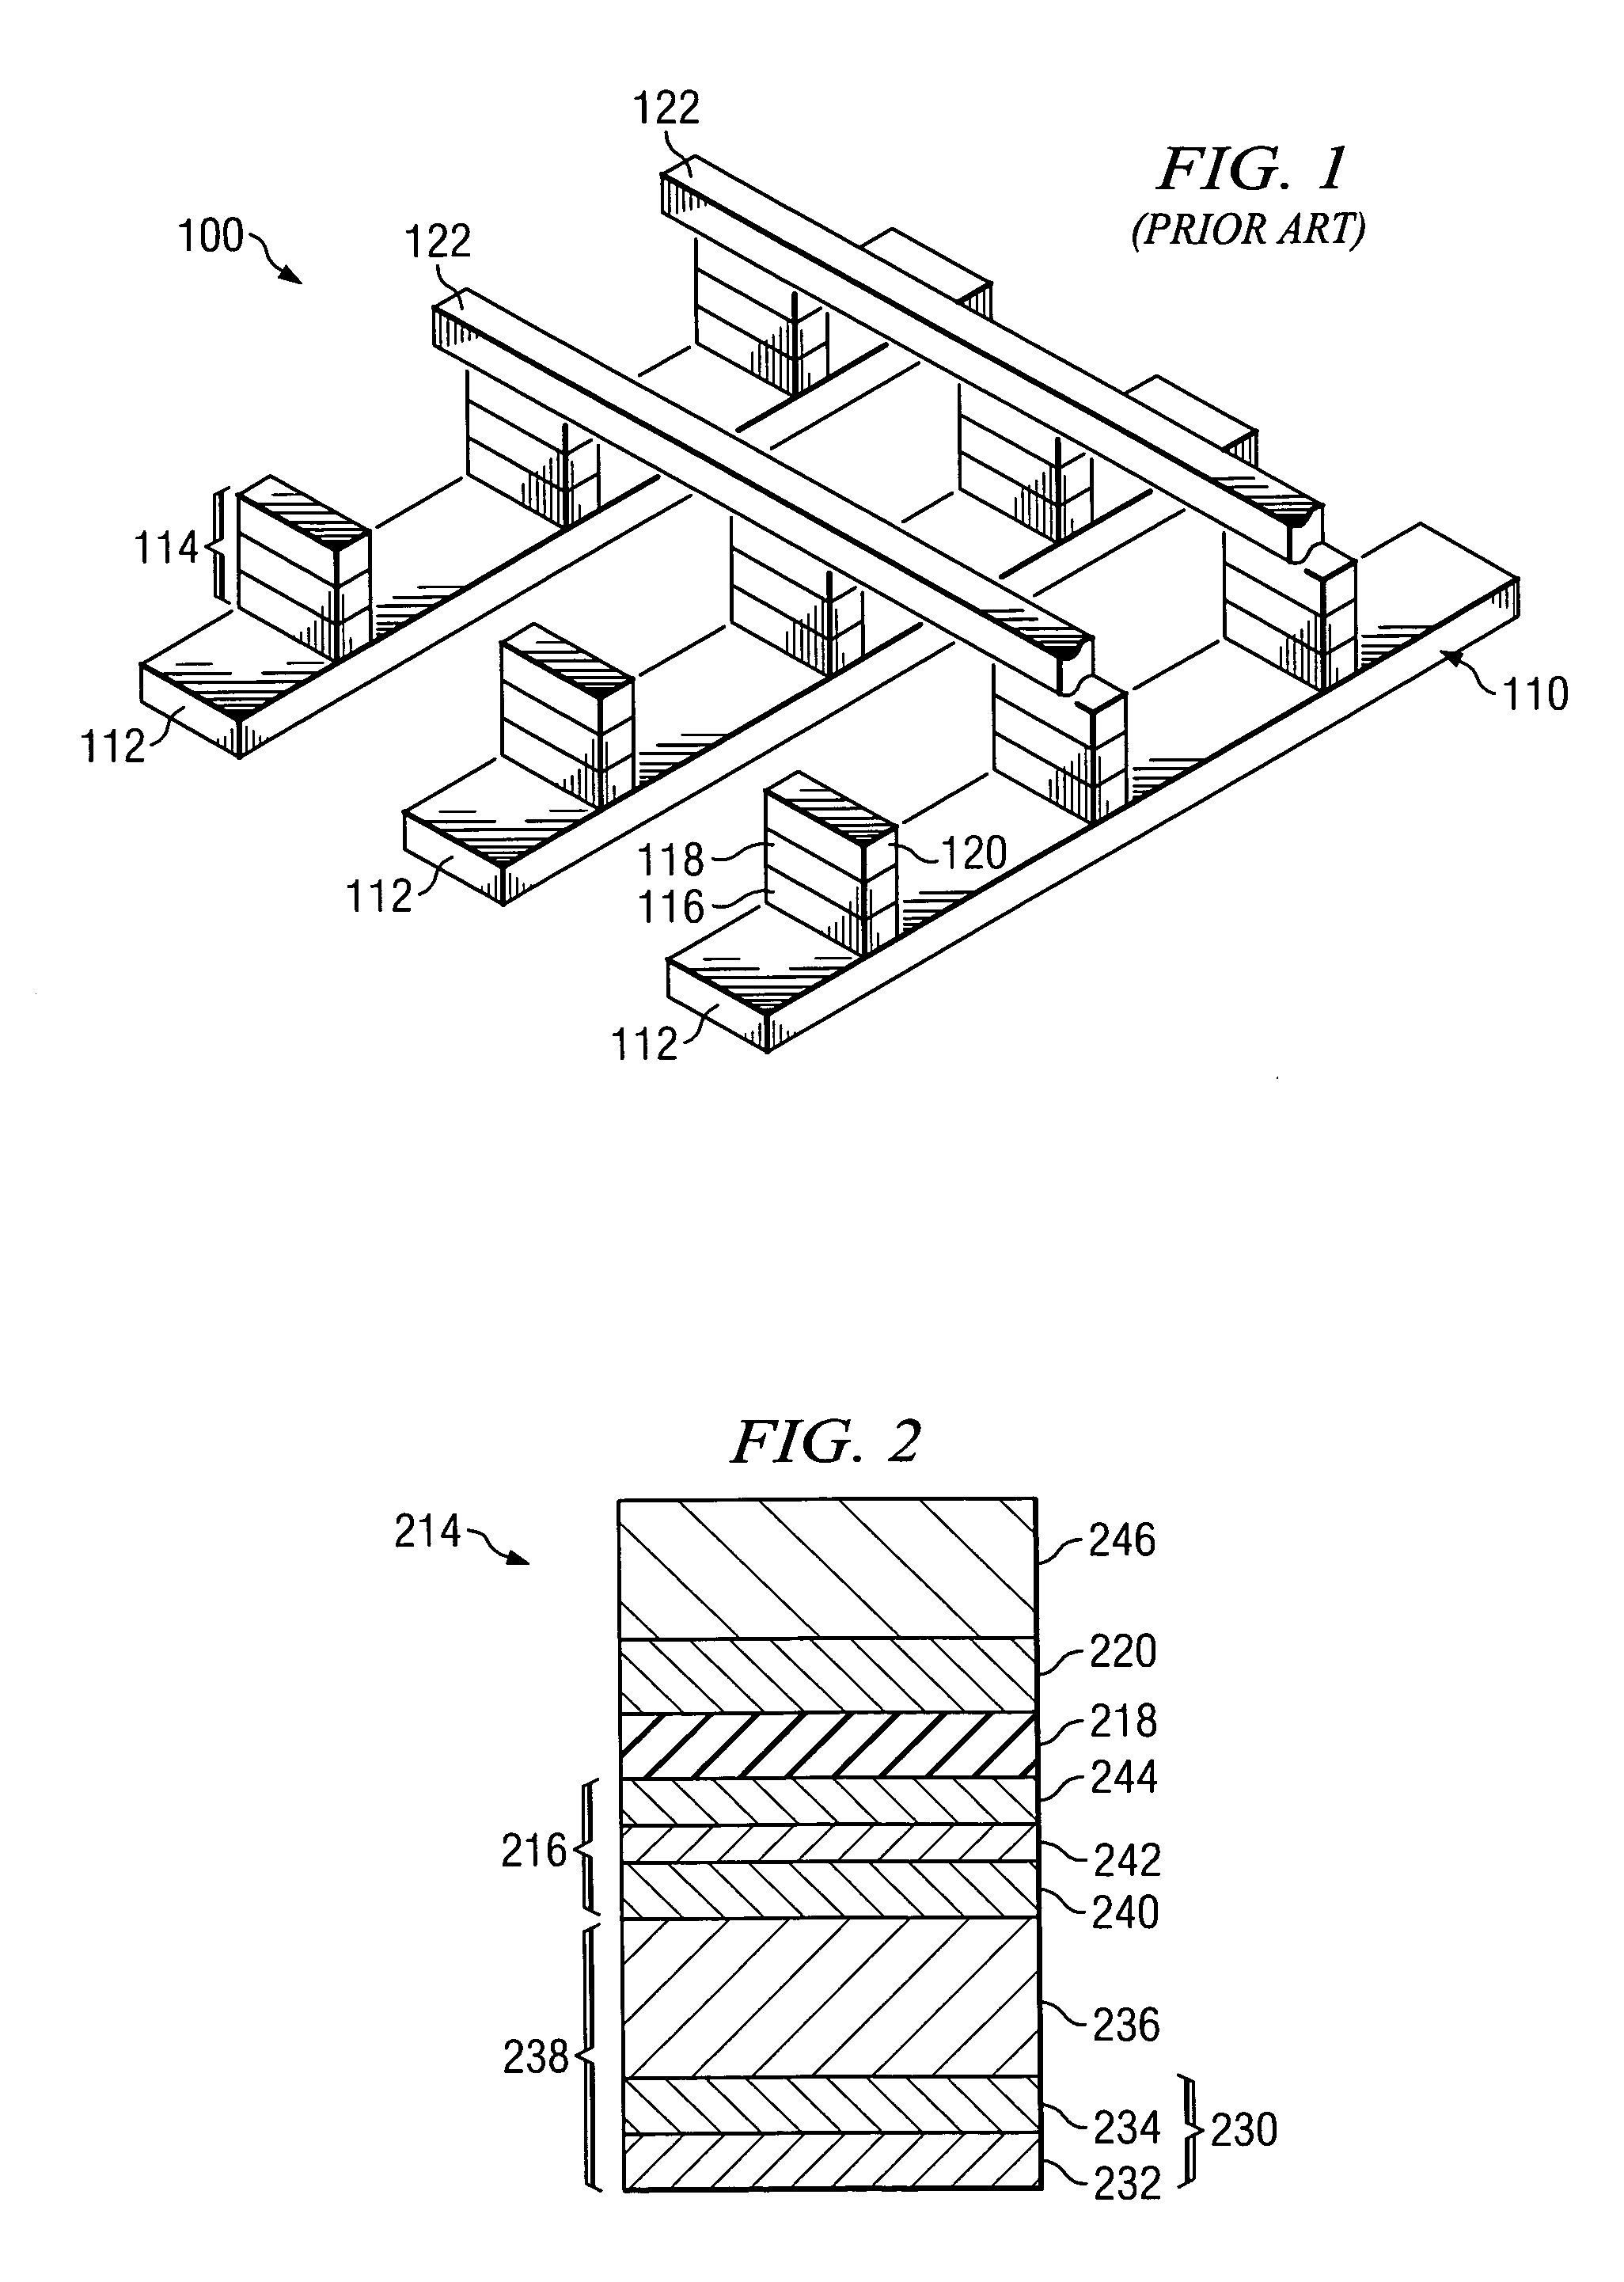 MTJ stack with crystallization inhibiting layer